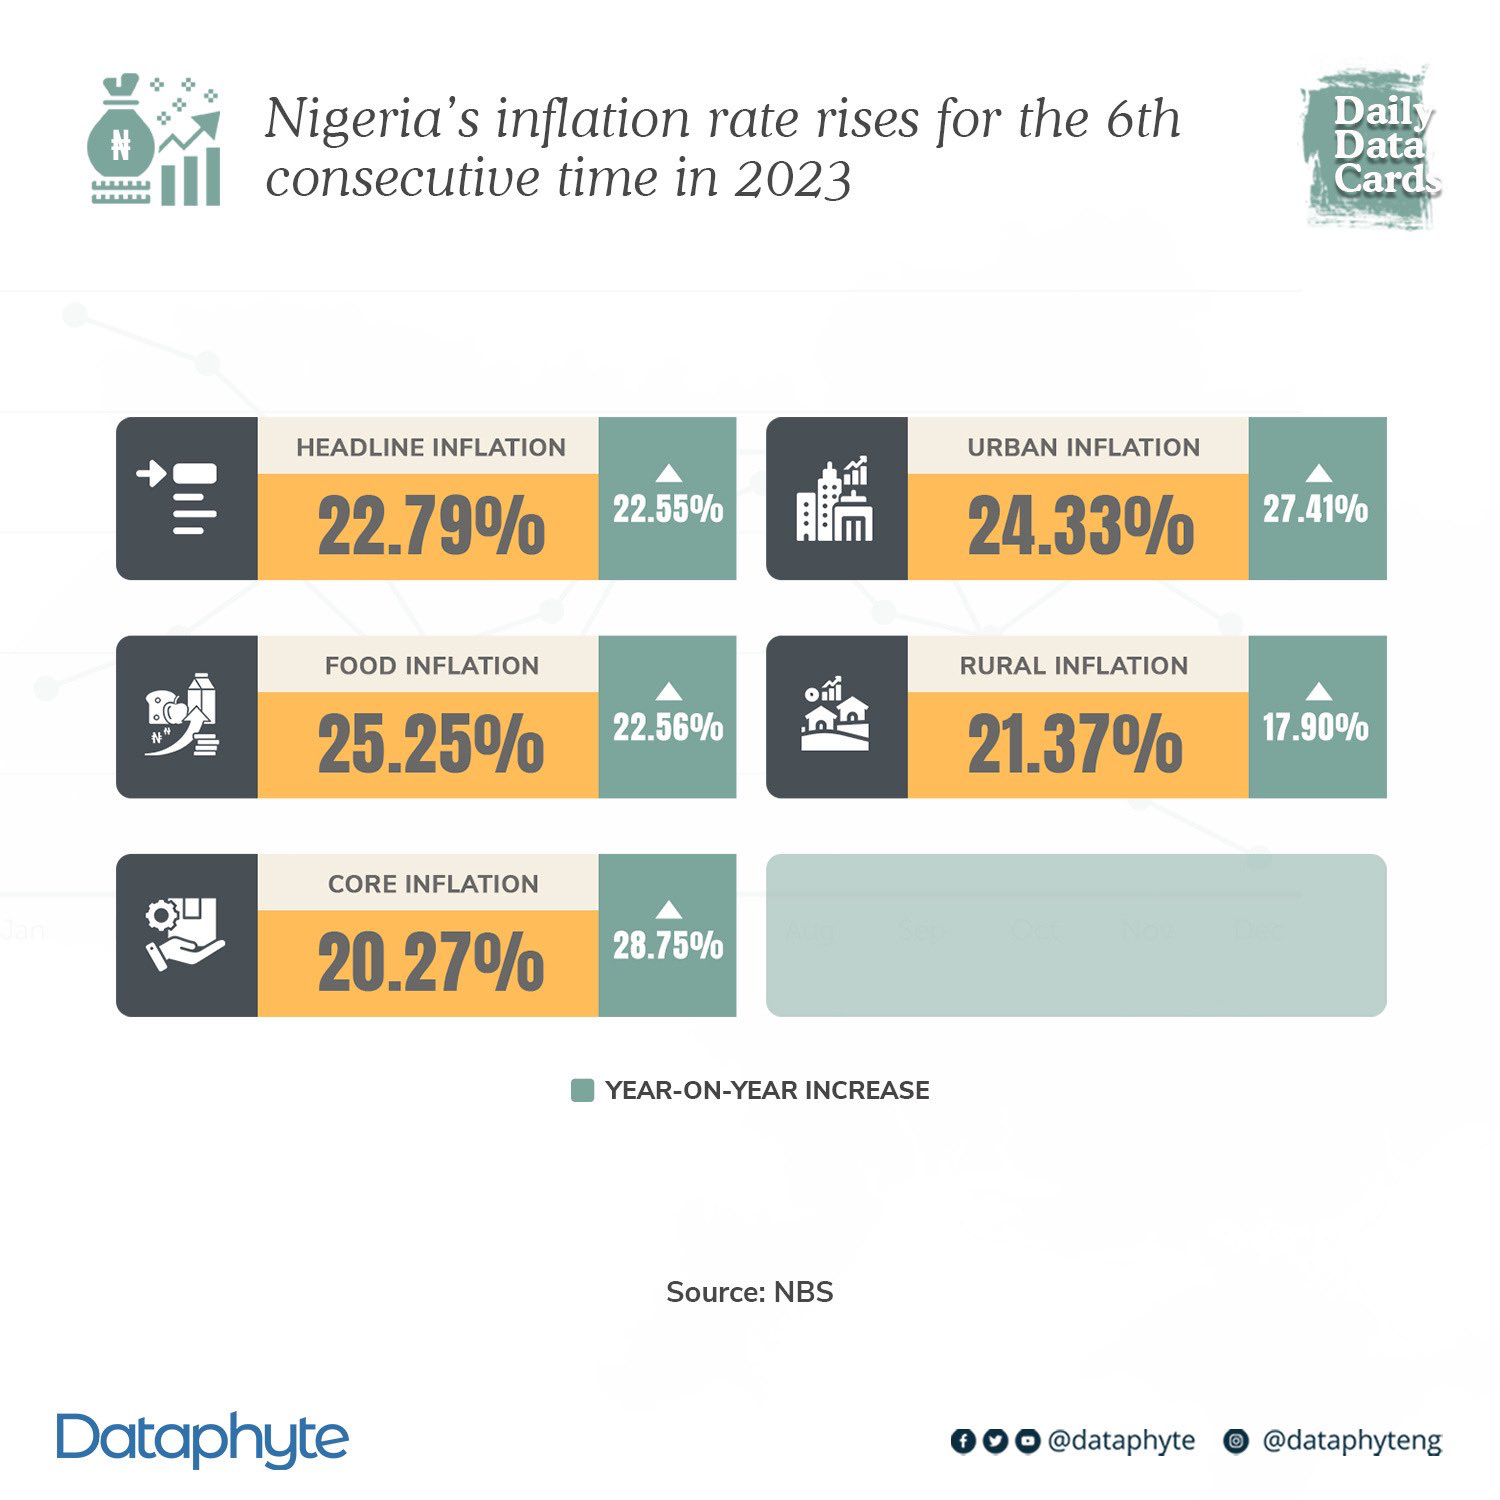 Inflation increases despite CBN’s increase of its interest rate